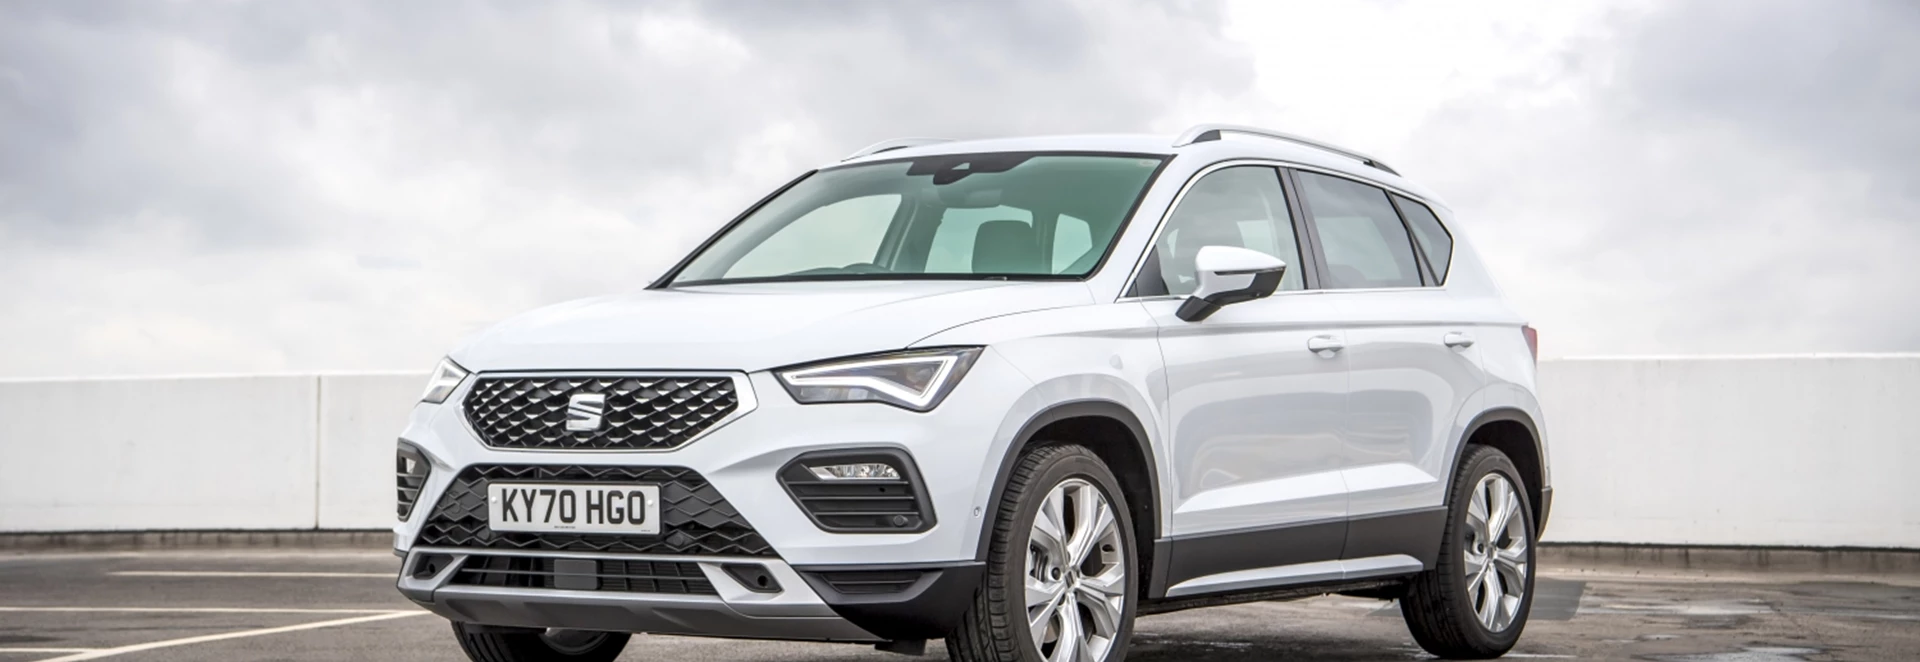 5 reasons why the Seat Ateca is a great family SUV 